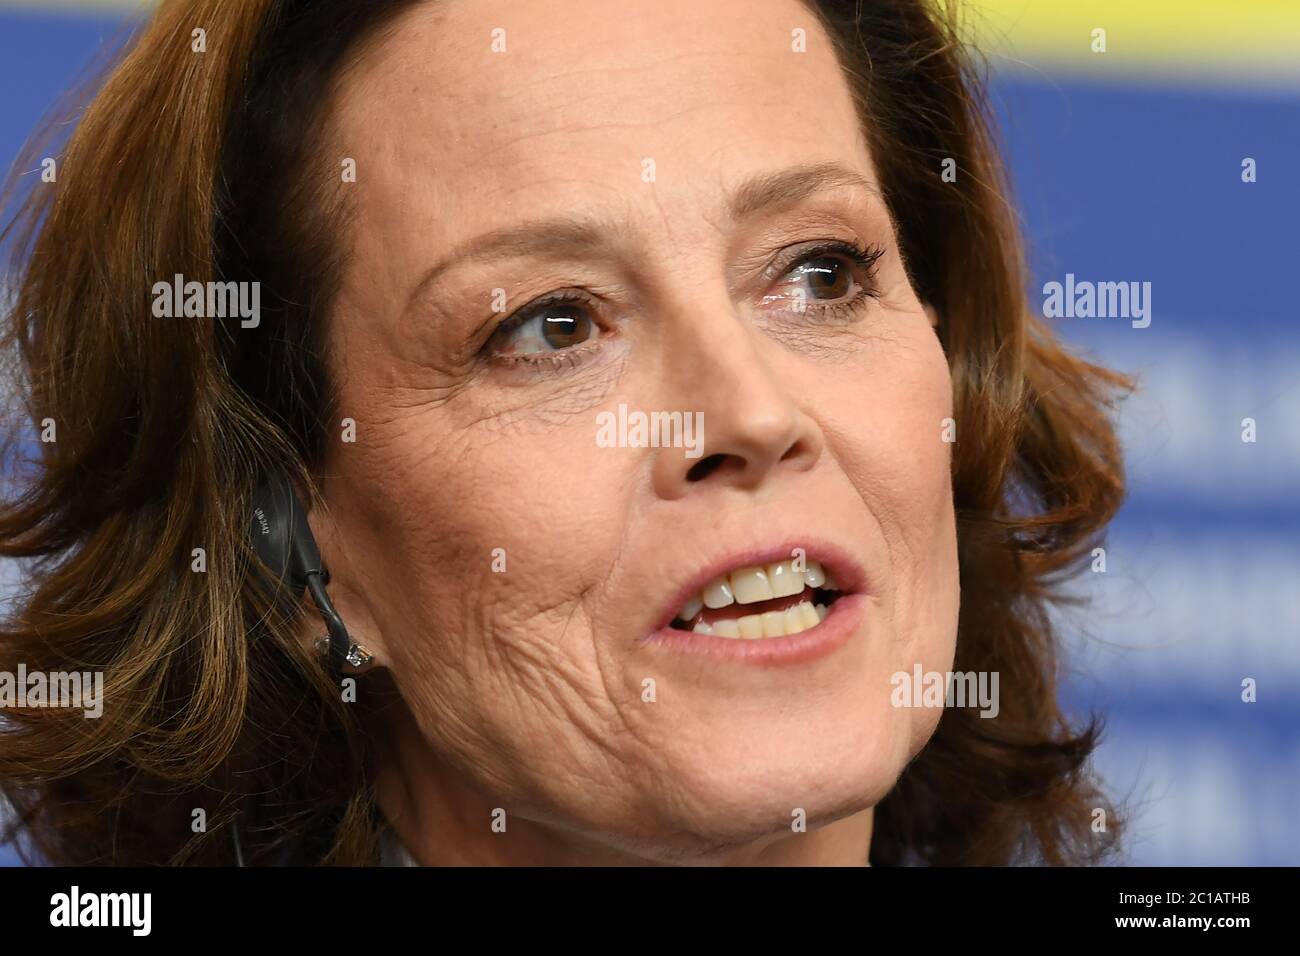 Sigourney Weaver attends the press conference for My Salinger Year during the 70th Berlin Film Festival at the Grand Hyatt Berlin. © Paul Treadway Stock Photo